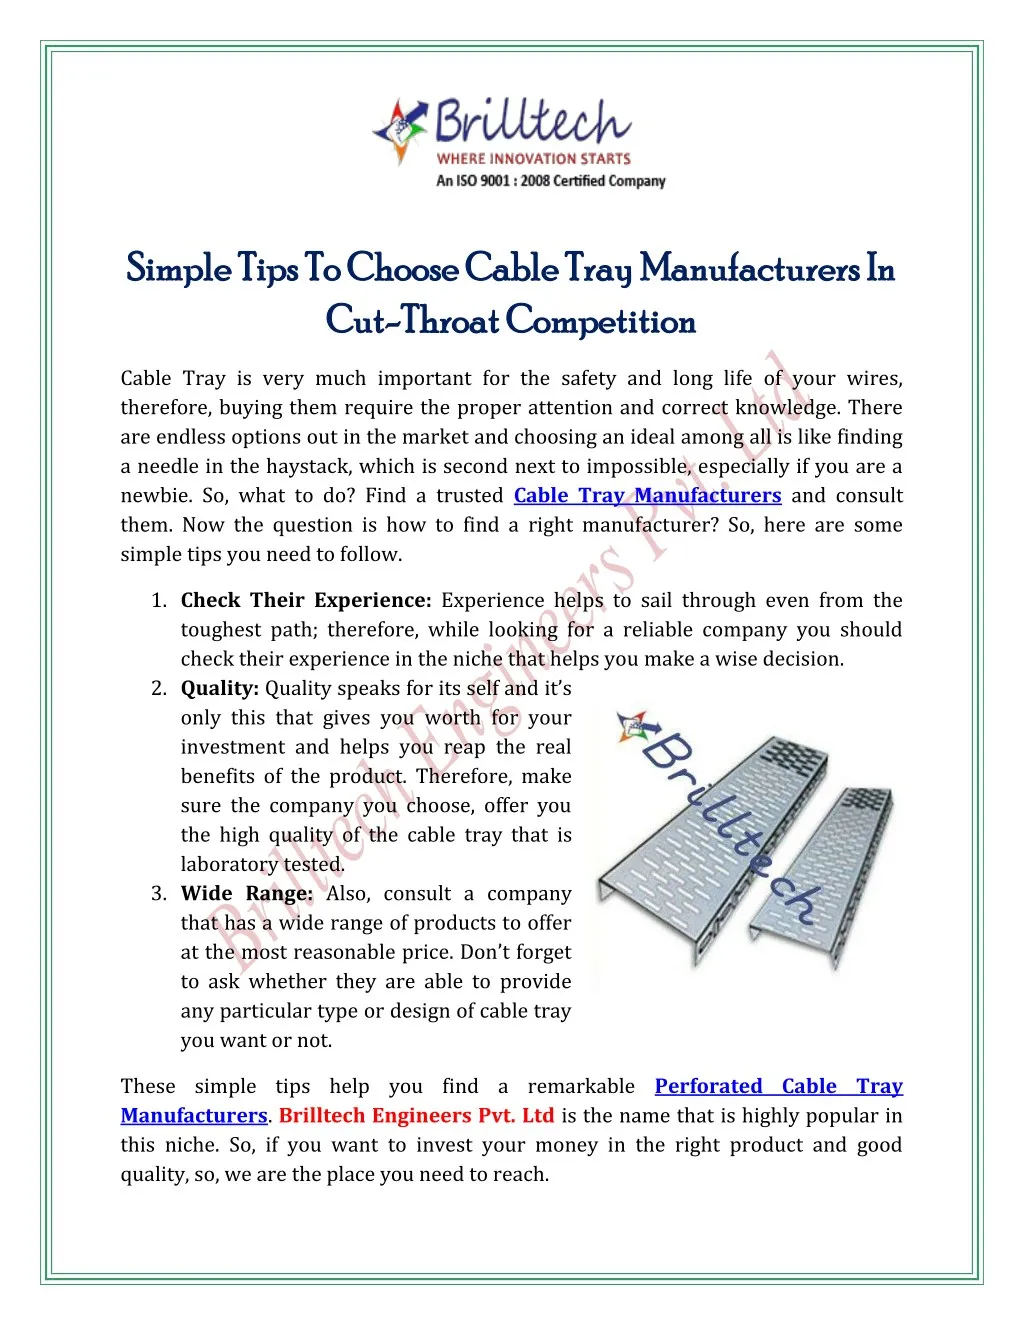 simple tips to choose cable tray manufacturers